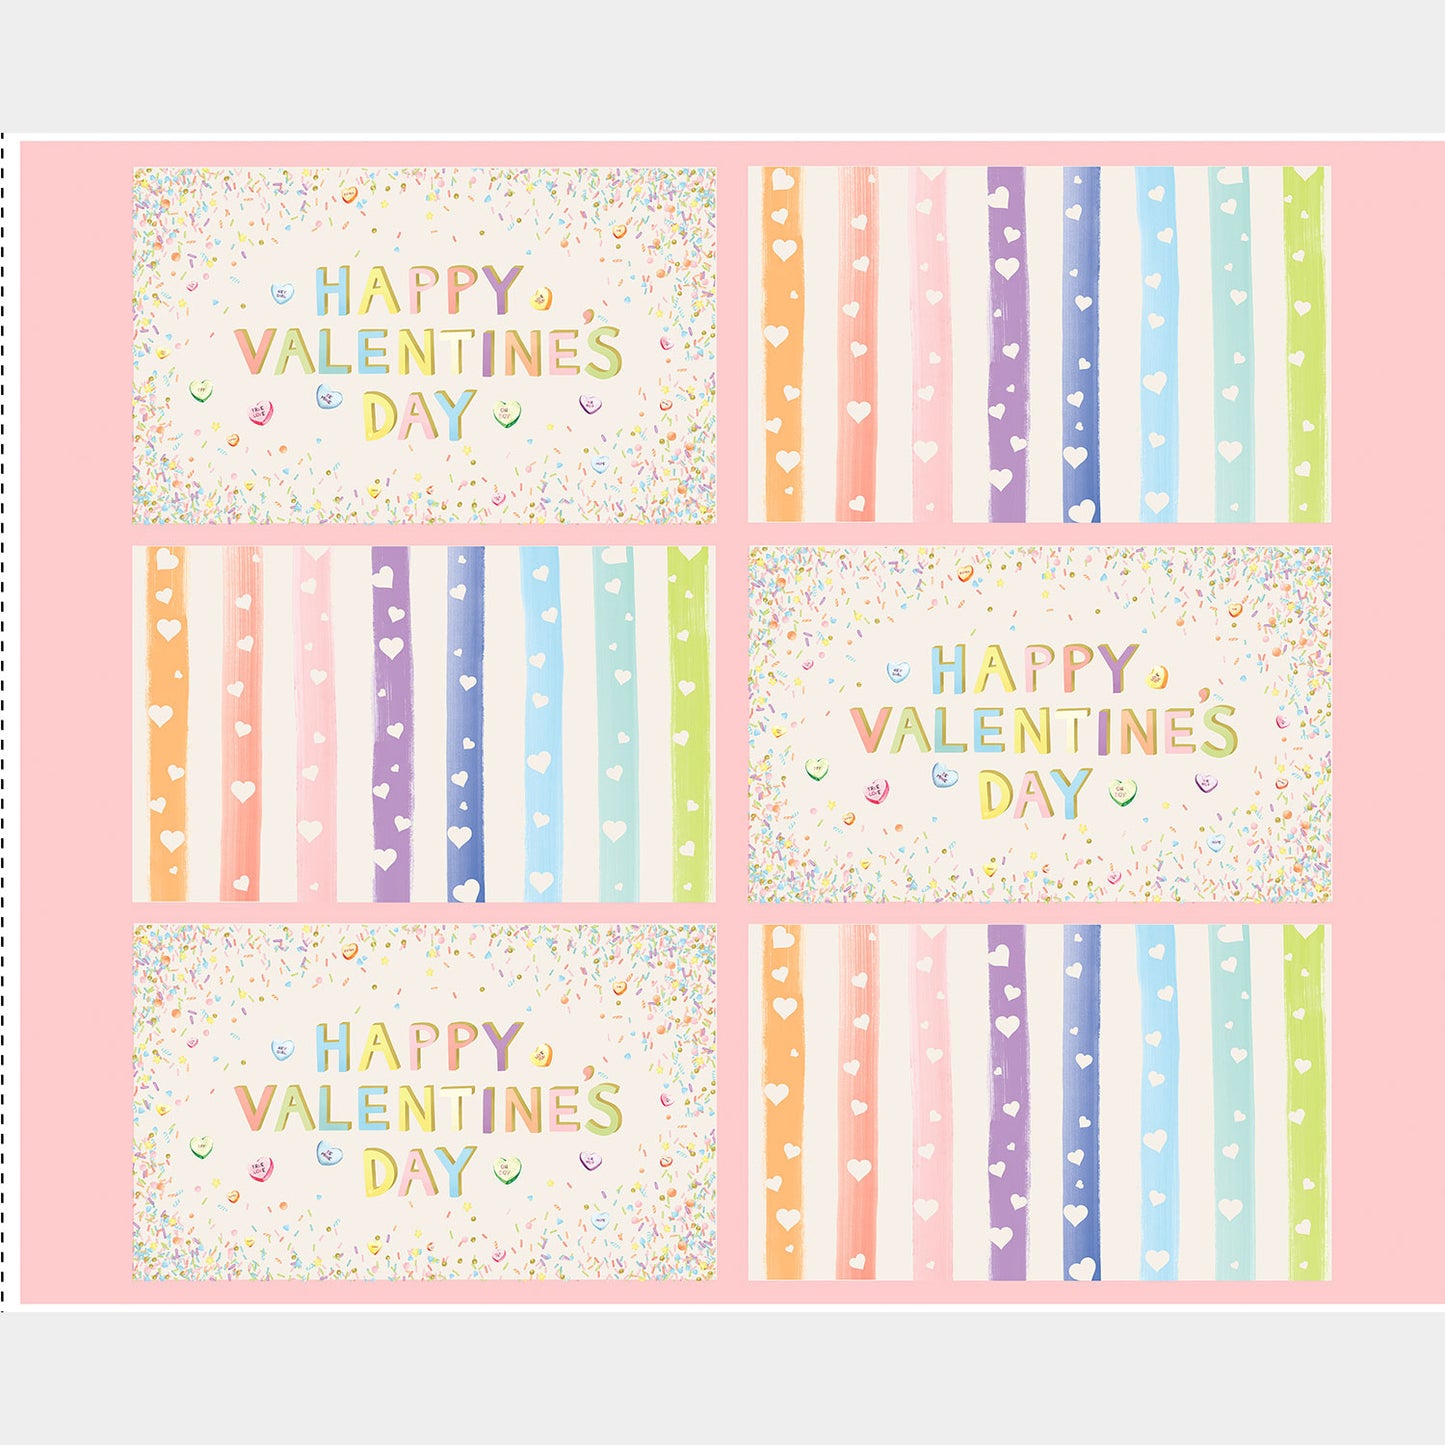 Monthly Placemat Panels - February Valentine's Placemat Multi Panel Primary Image